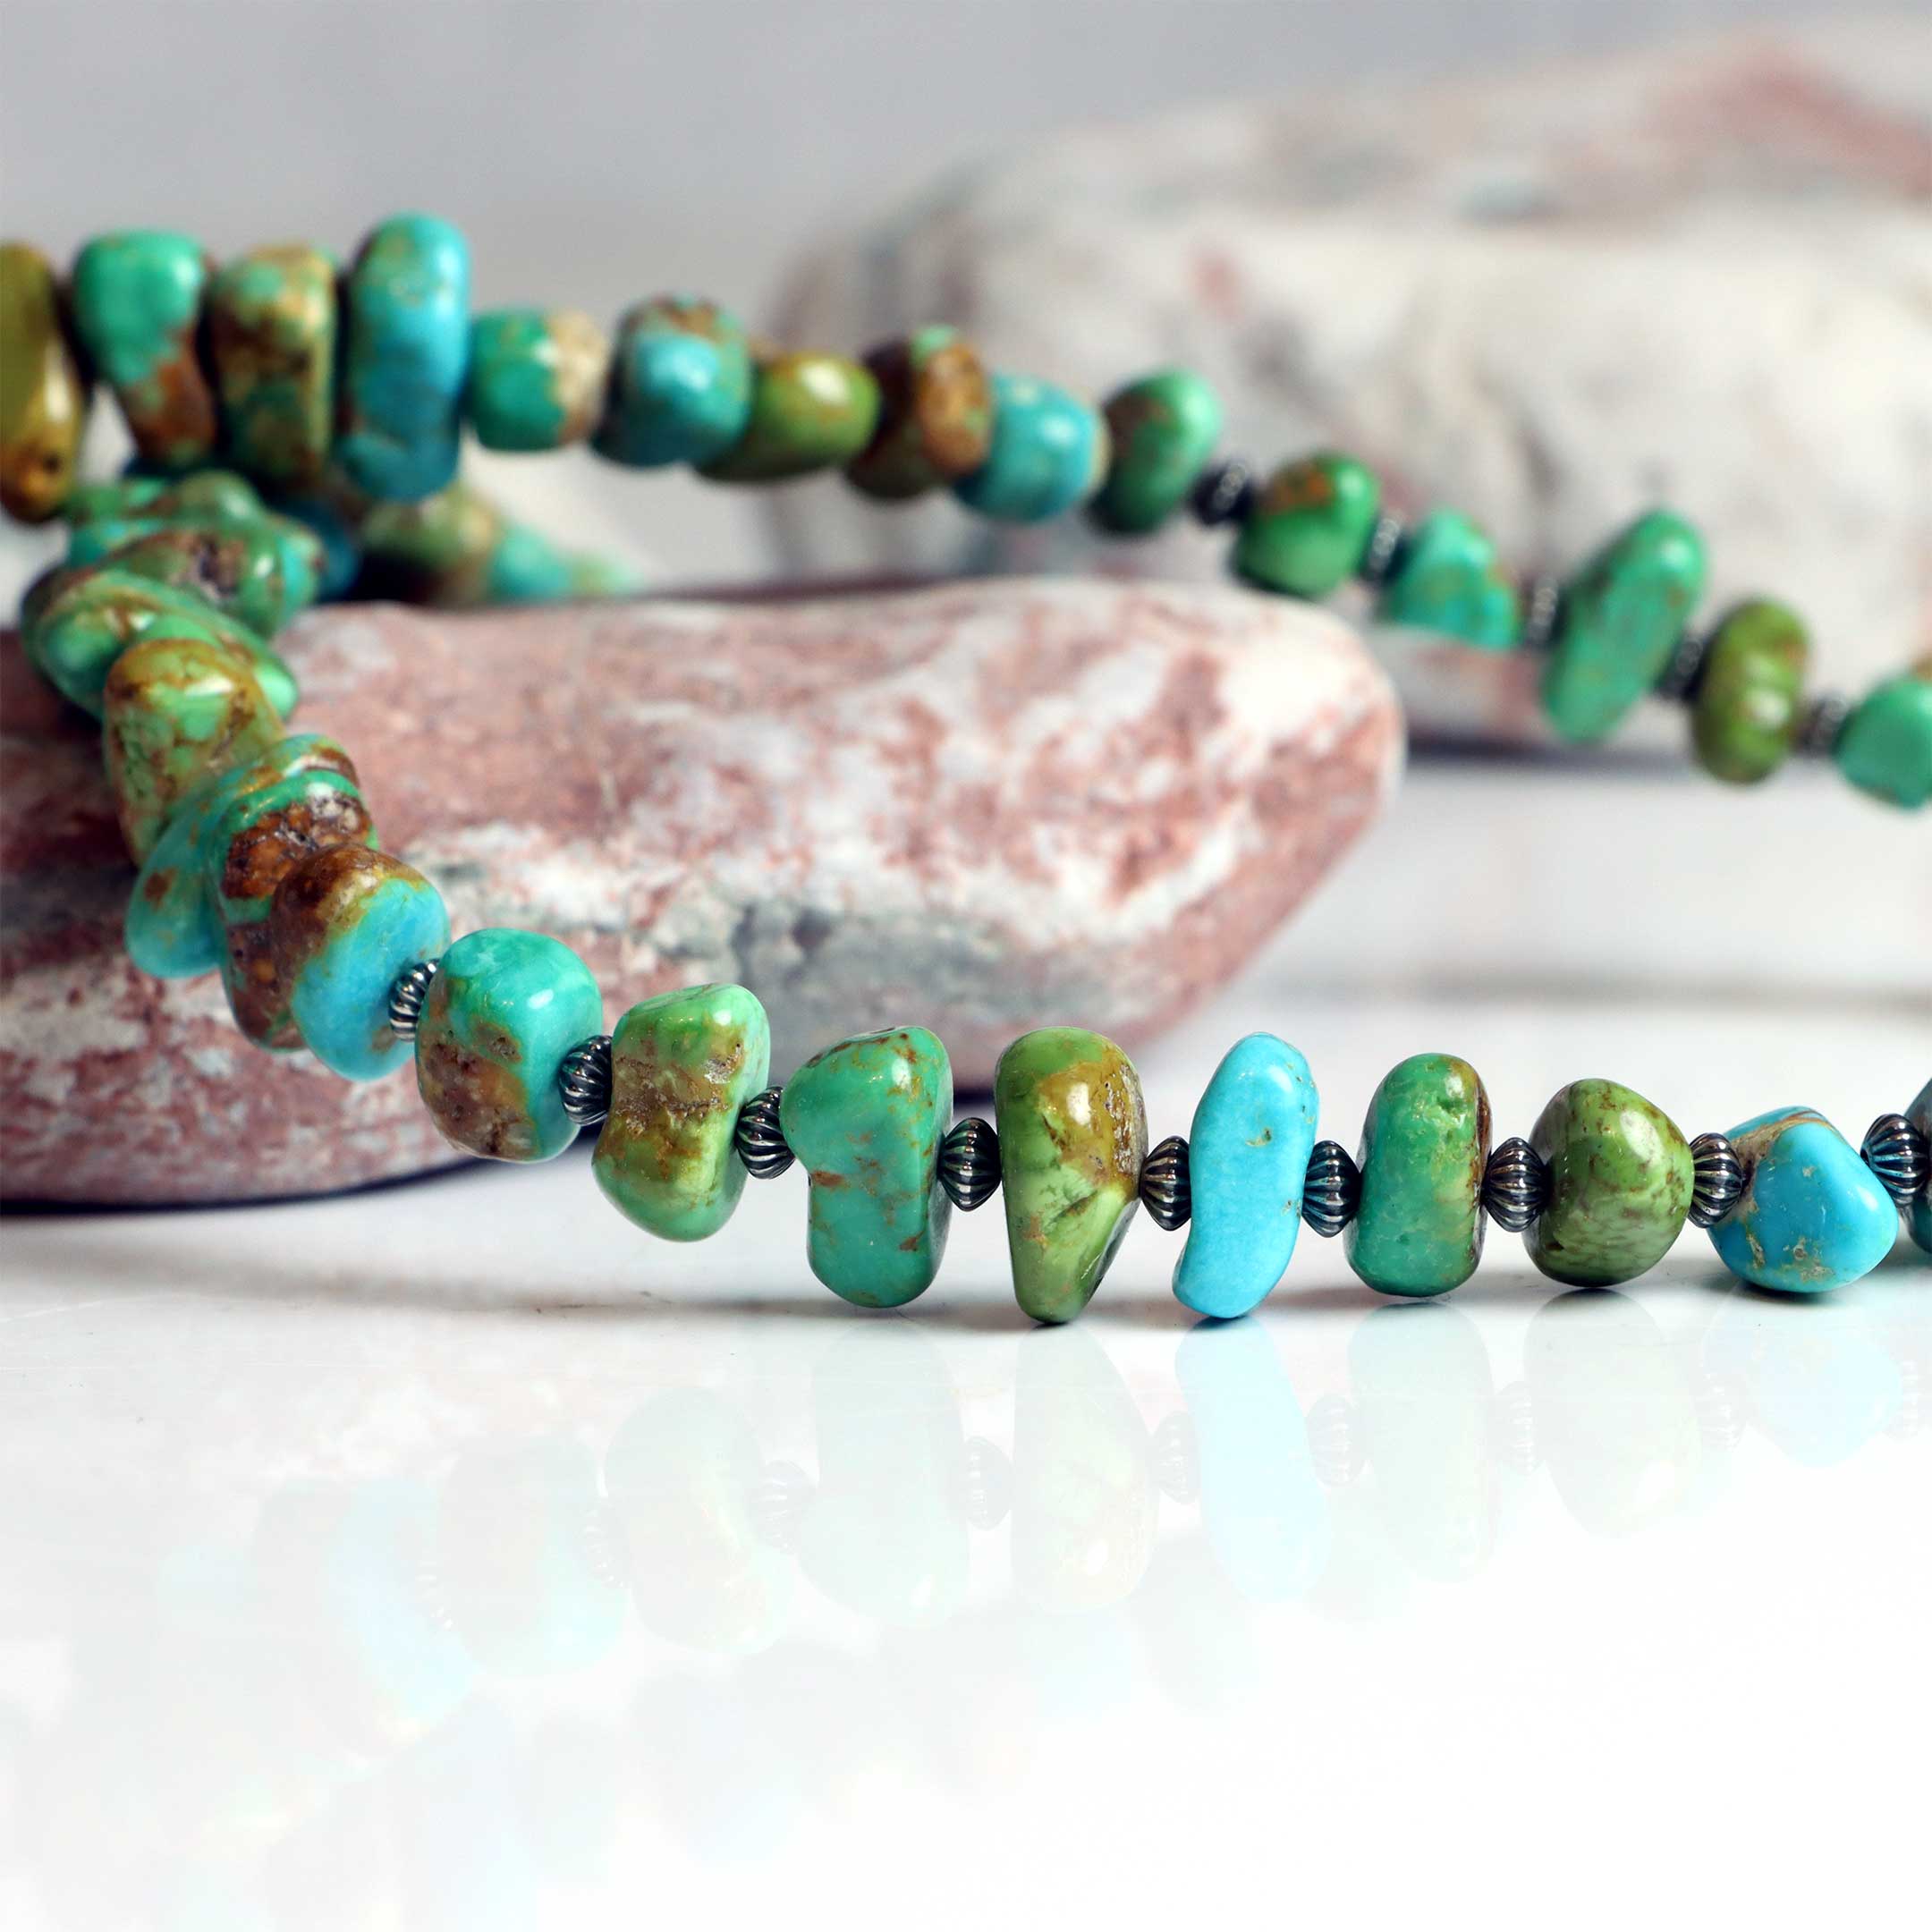 Ithaca Peak Turquoise Necklace with Sterling Silver Accents